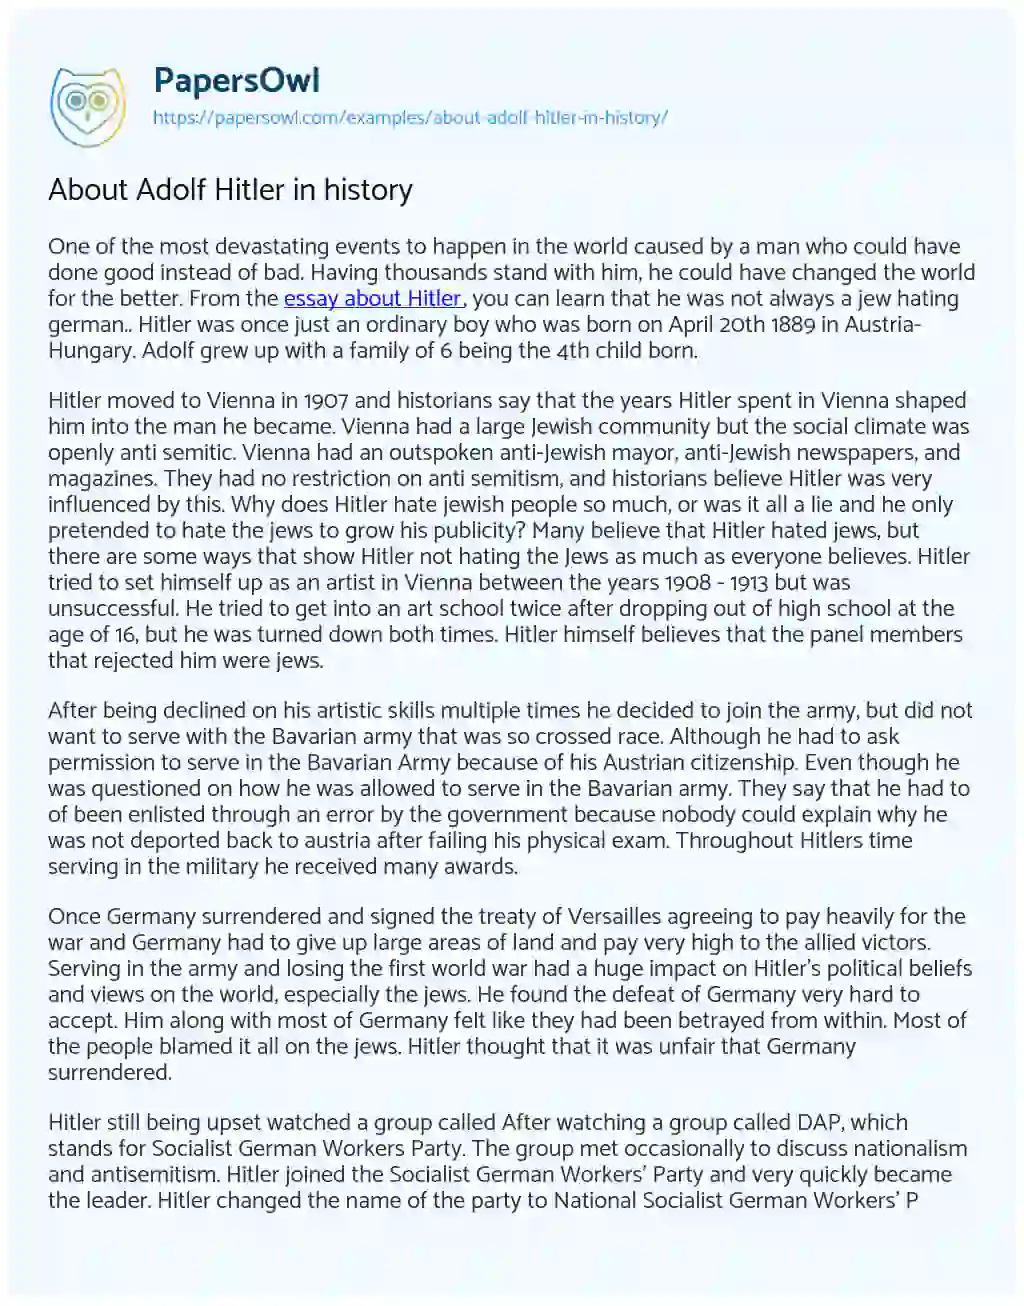 About Adolf Hitler in History essay